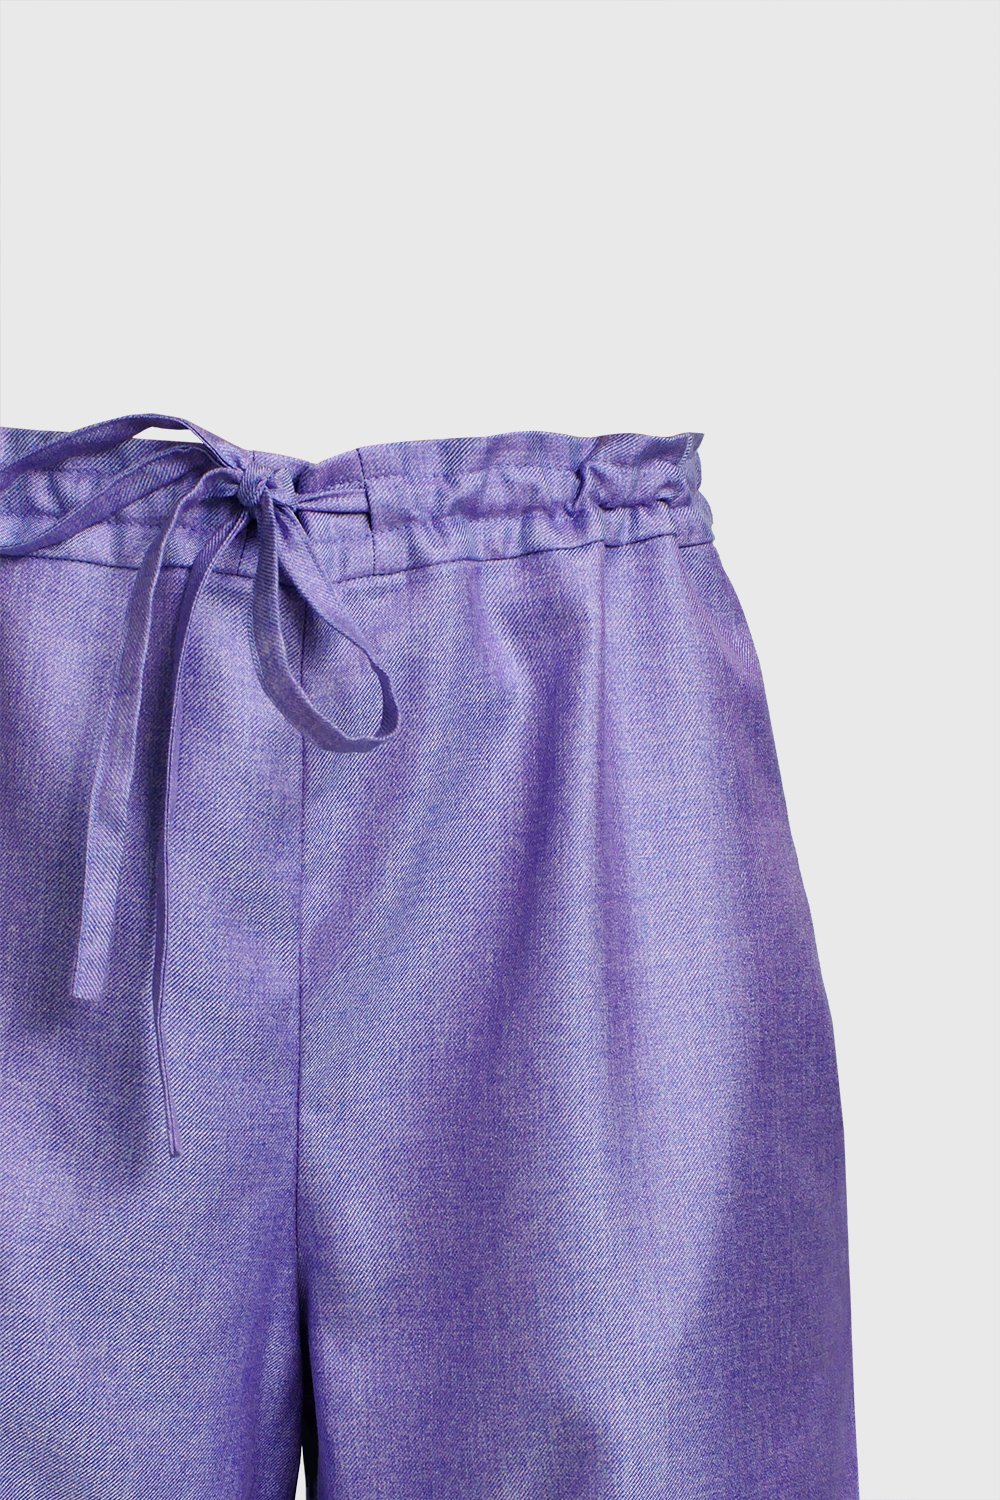 Curved Purple Blue Trousers - Silk